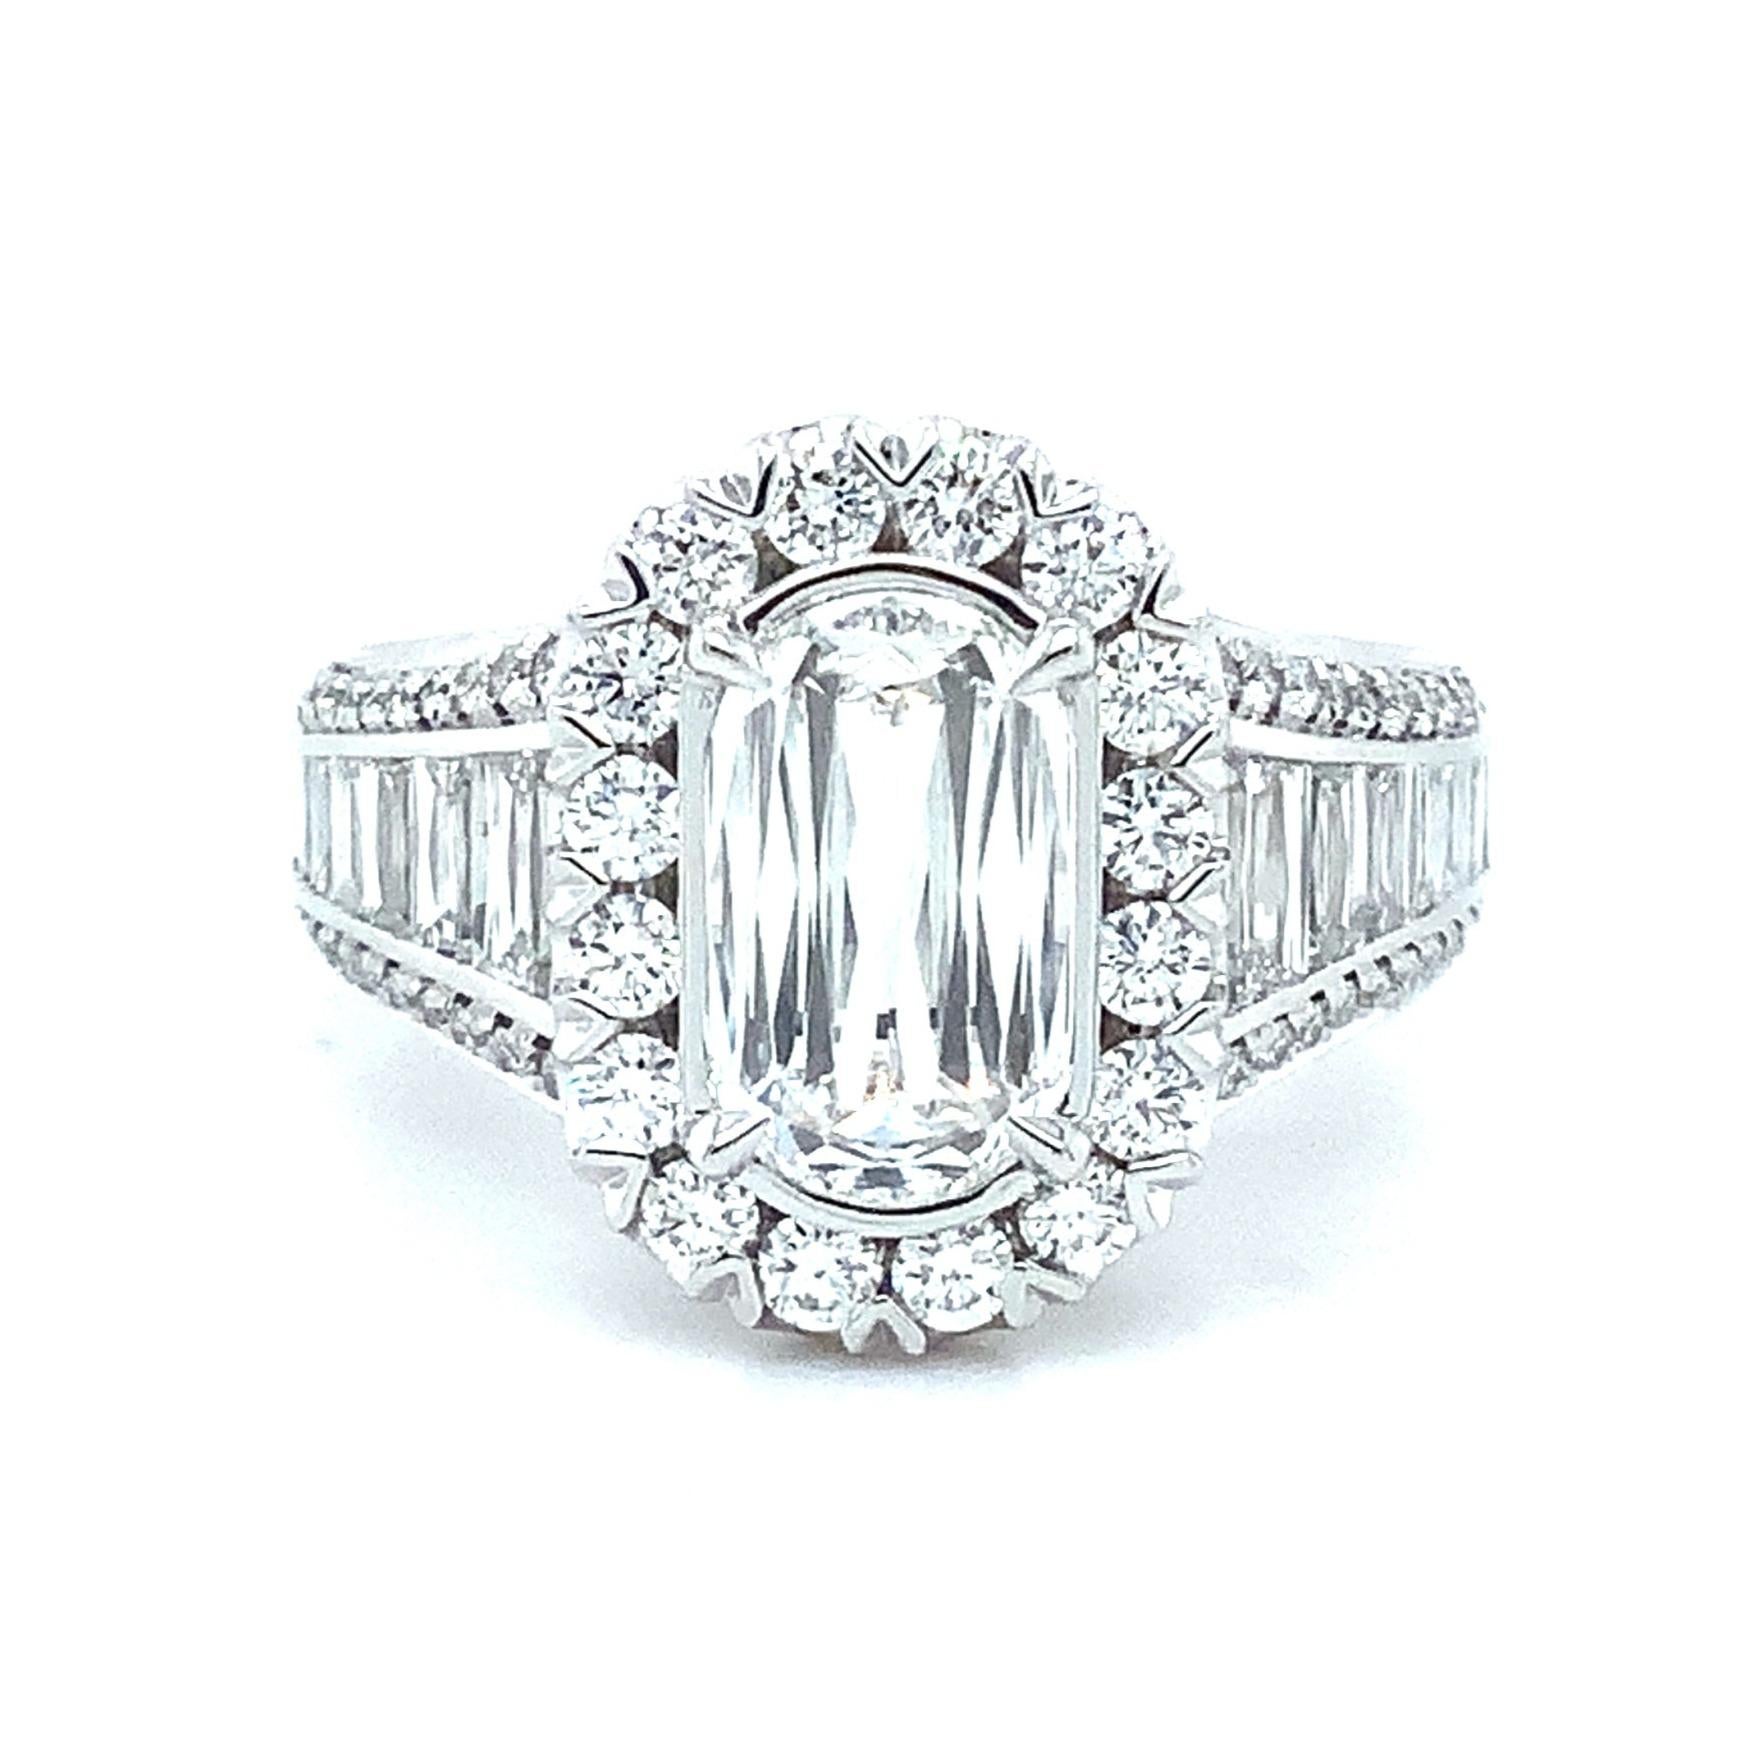 Christopher Designs Crisscut® Engagement Ring with 1.21 ct L'Amour Crisscut® Diamond center, Surrounded by Crisscut® Tapered Baguette cut Diamond 1.23 ctw and Round Brilliant Diamonds 0.66 ctw. The modern design Ring features 3-row Tapered Shank